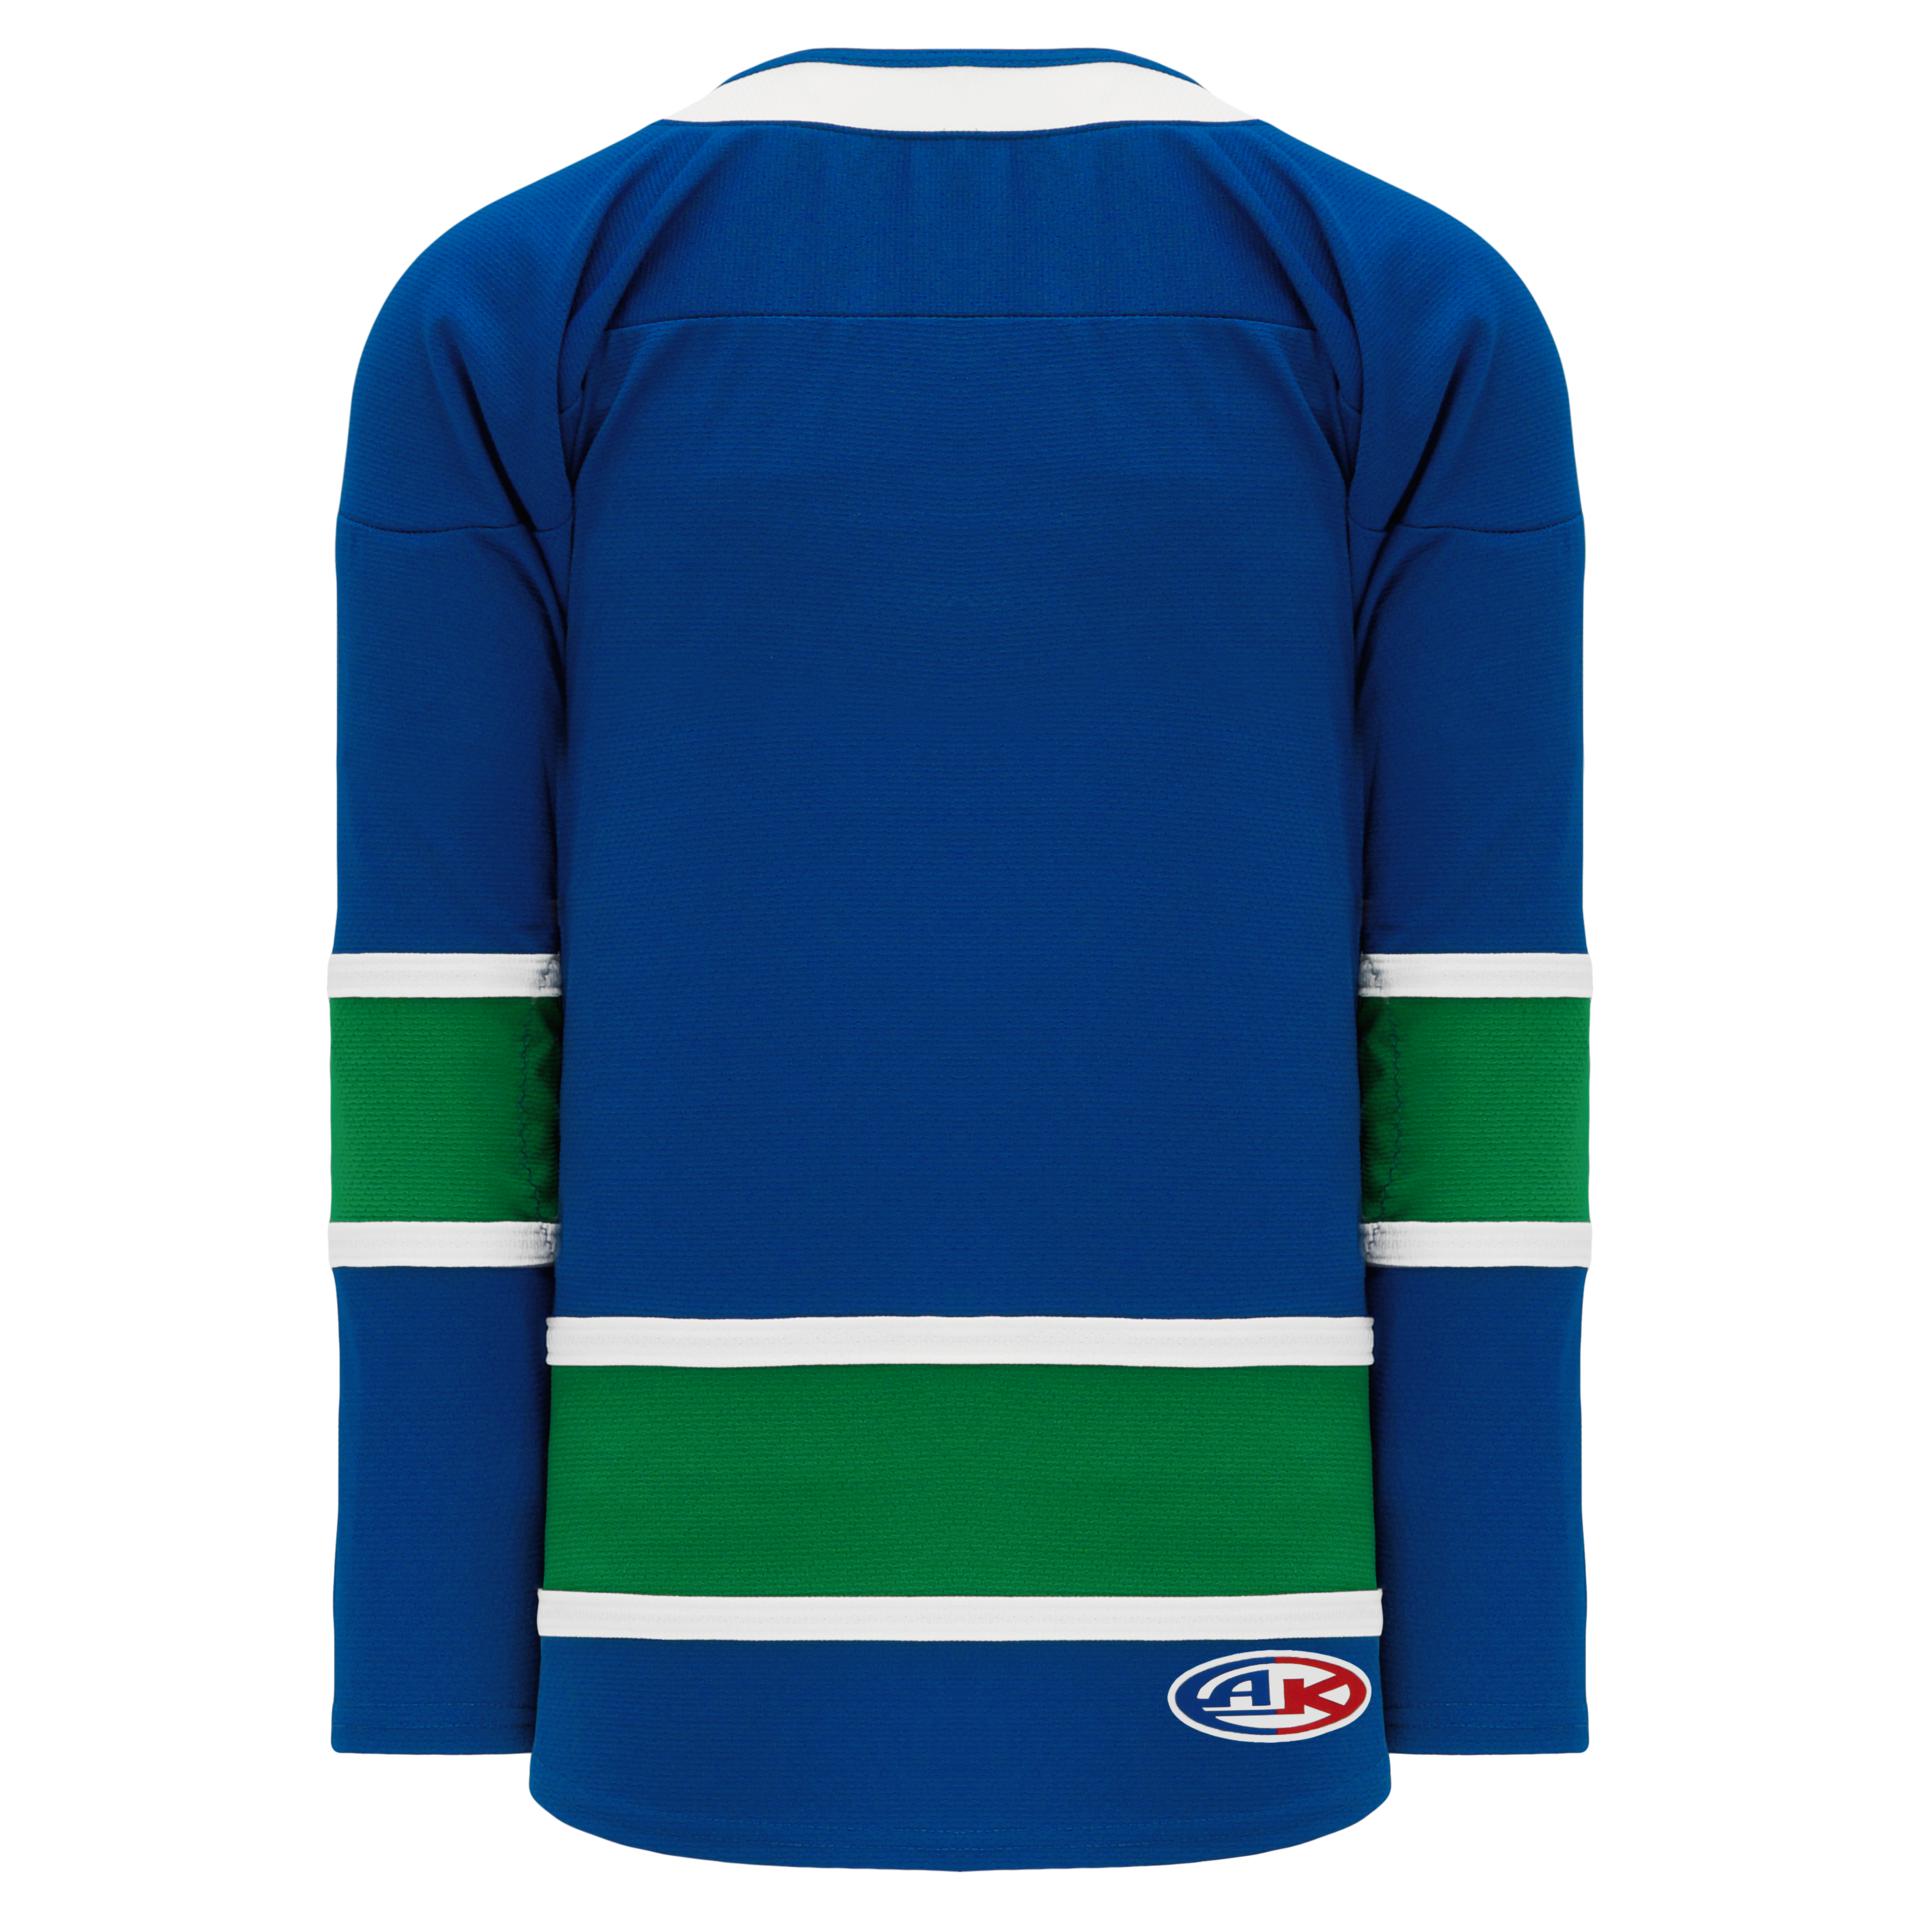 Vancouver Canucks new 3rd jersey : r/hockey